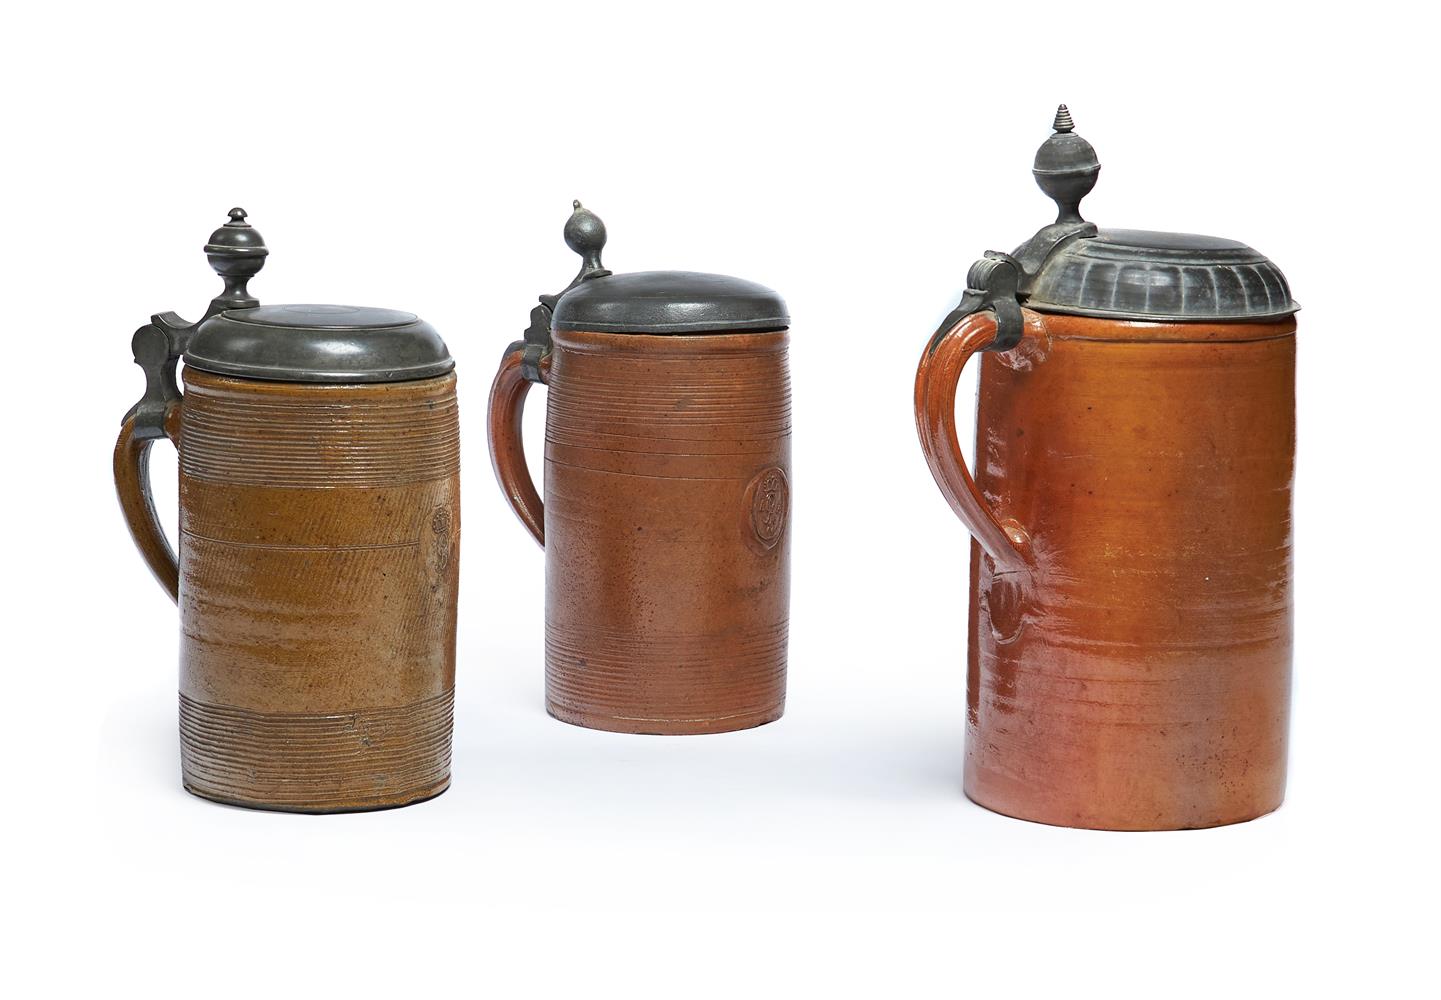 THREE GERMAN STONEWARE PEWTER-MOUNTED TANKARDS AND HINGED COVERS, 17TH/18TH CENTURY - Image 2 of 6